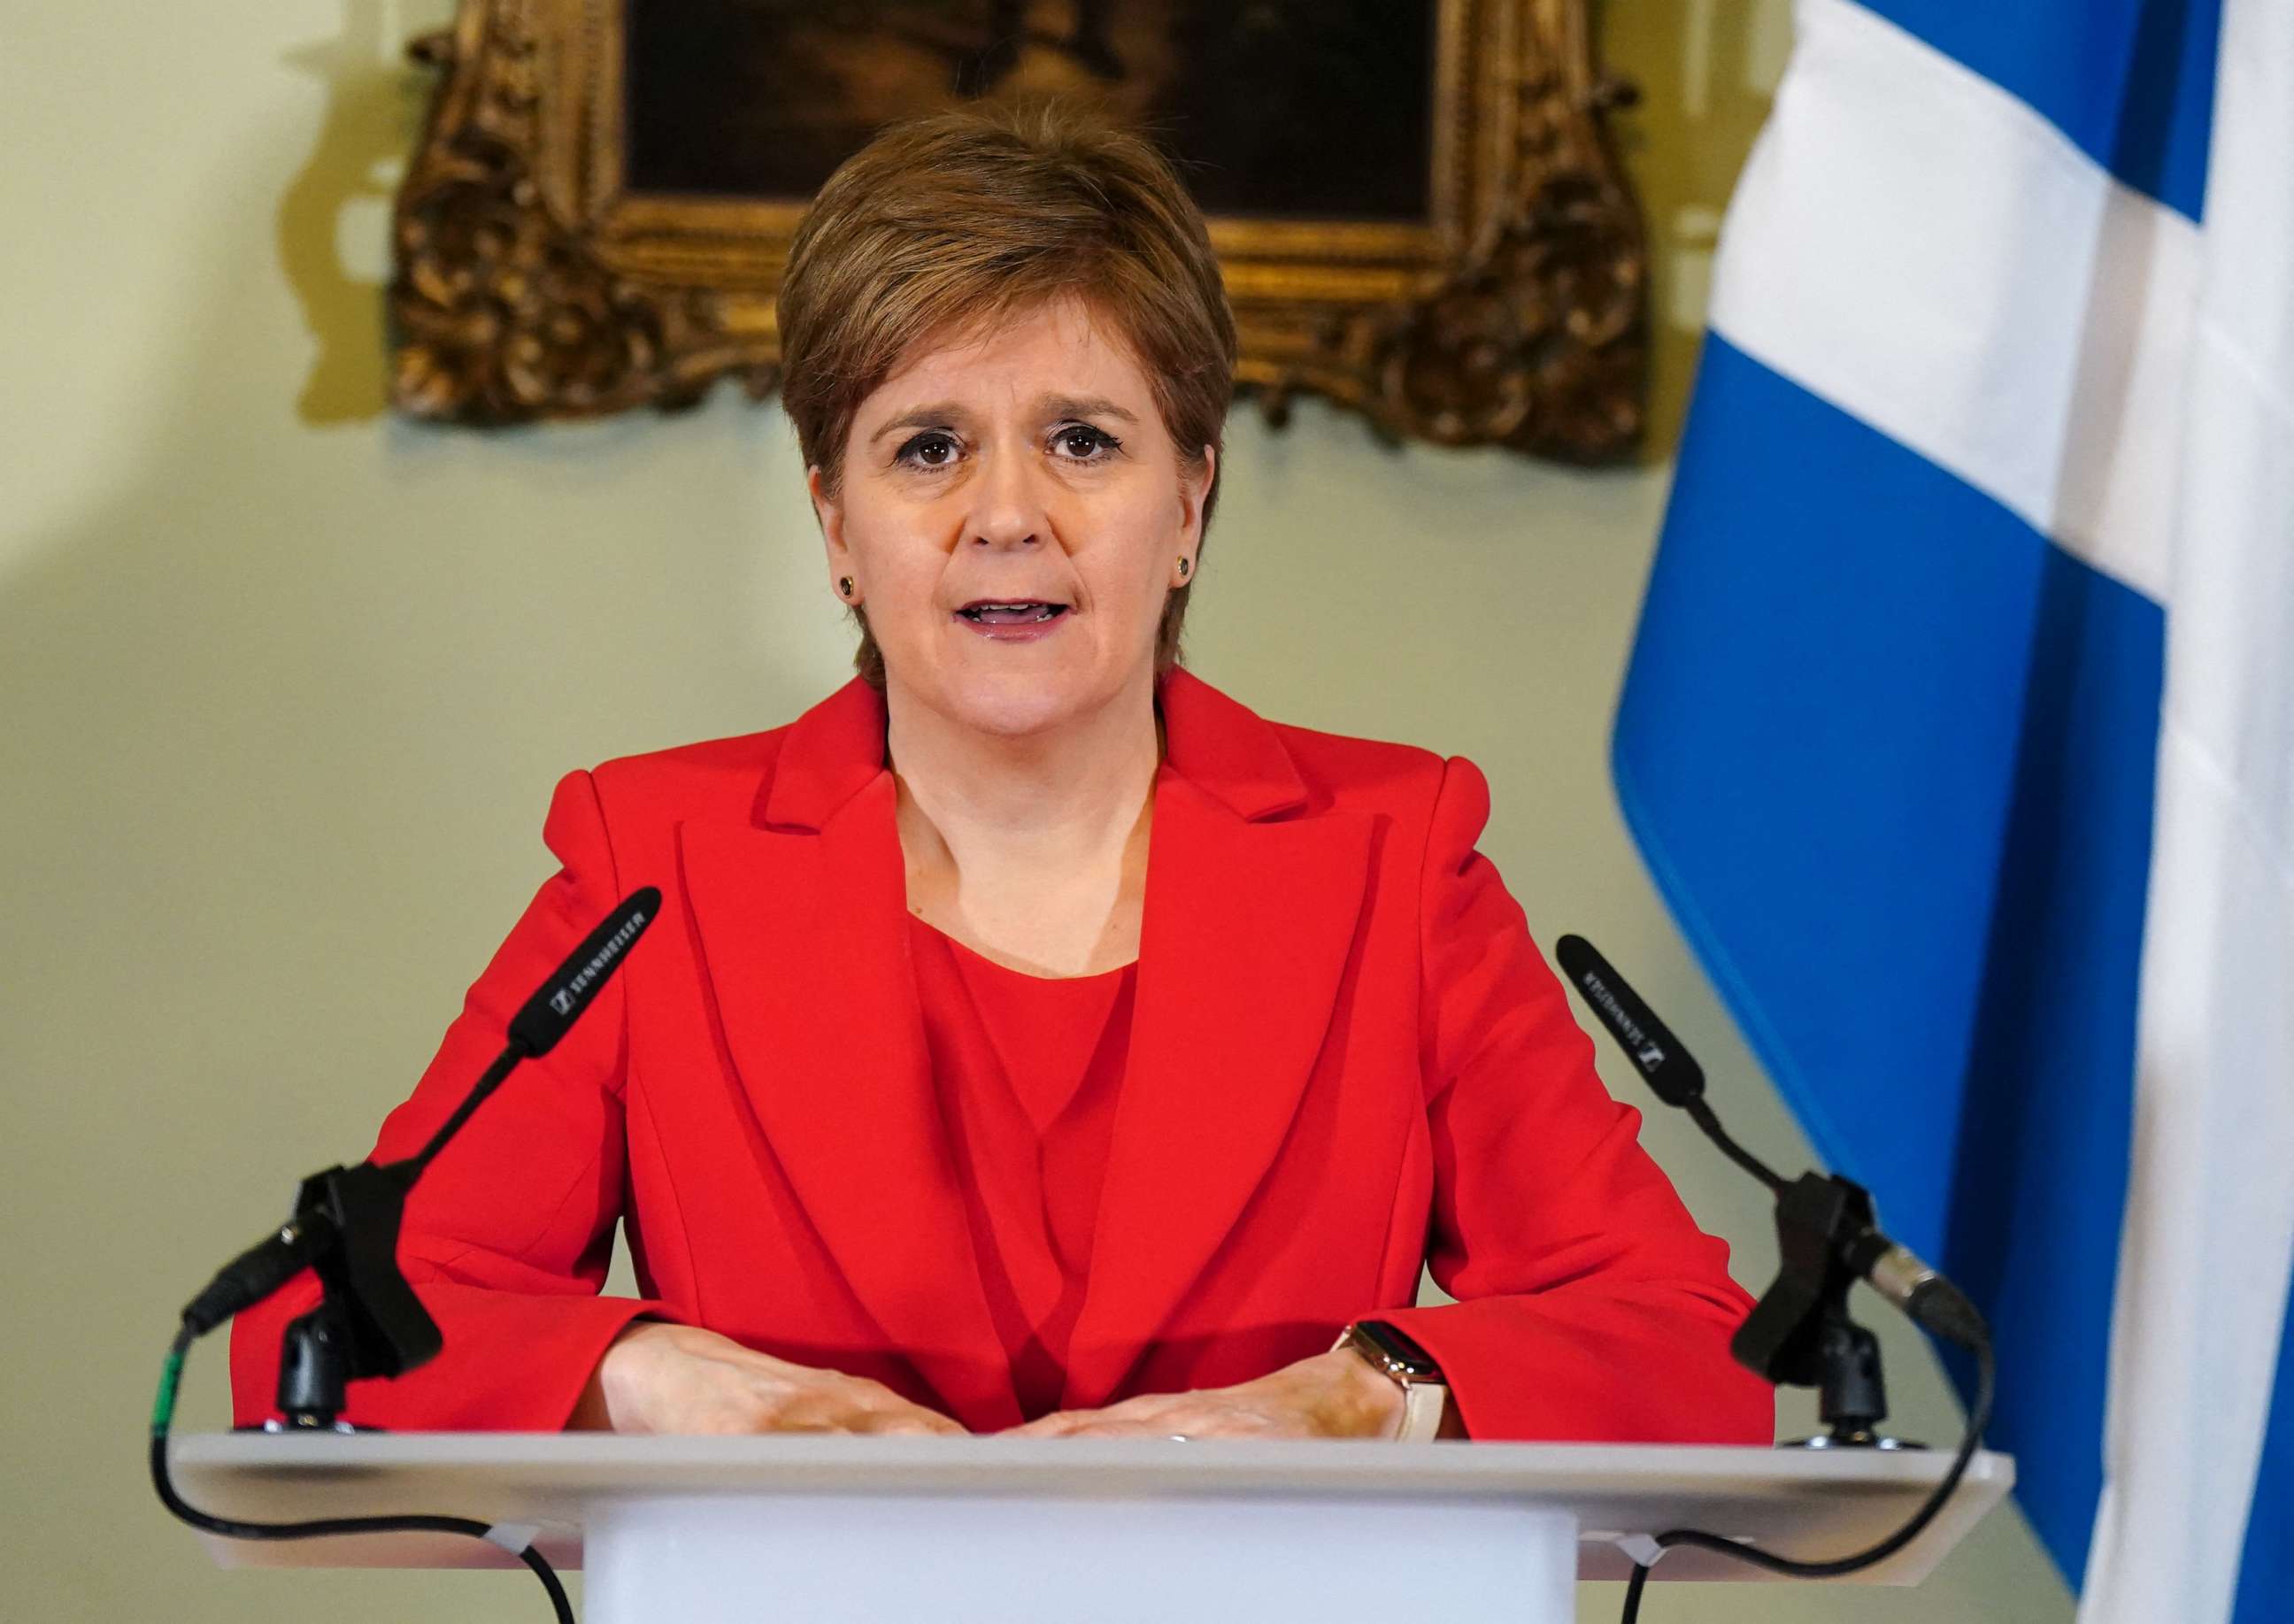 PHOTO: Scotland's First Minister, and leader of the Scottish National Party, Nicola Sturgeon, speaks during a press conference at Bute House in Edinburgh where she announced she will stand down as First Minister, in Edinburgh on Feb. 15, 2023.